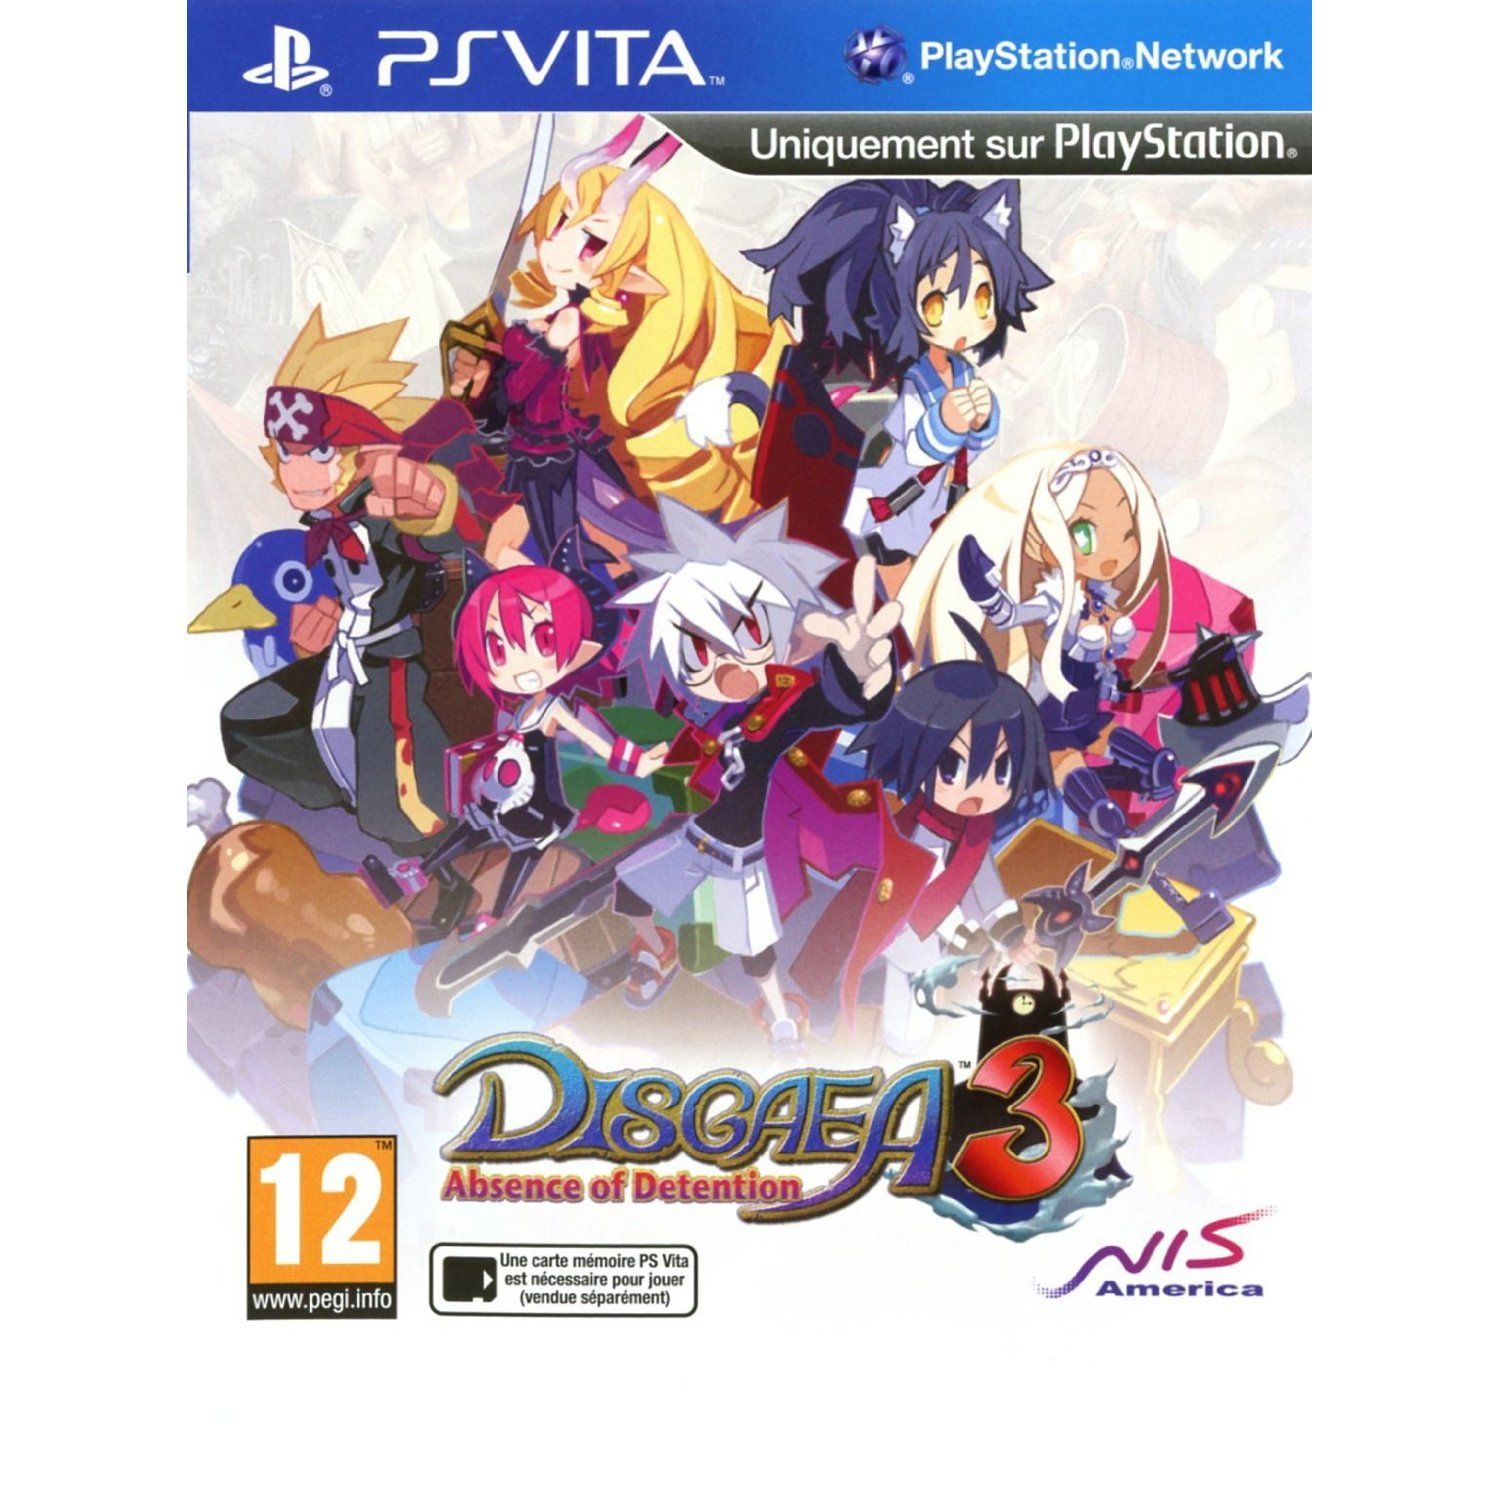 Disgaea 3 : Absence of Detention 